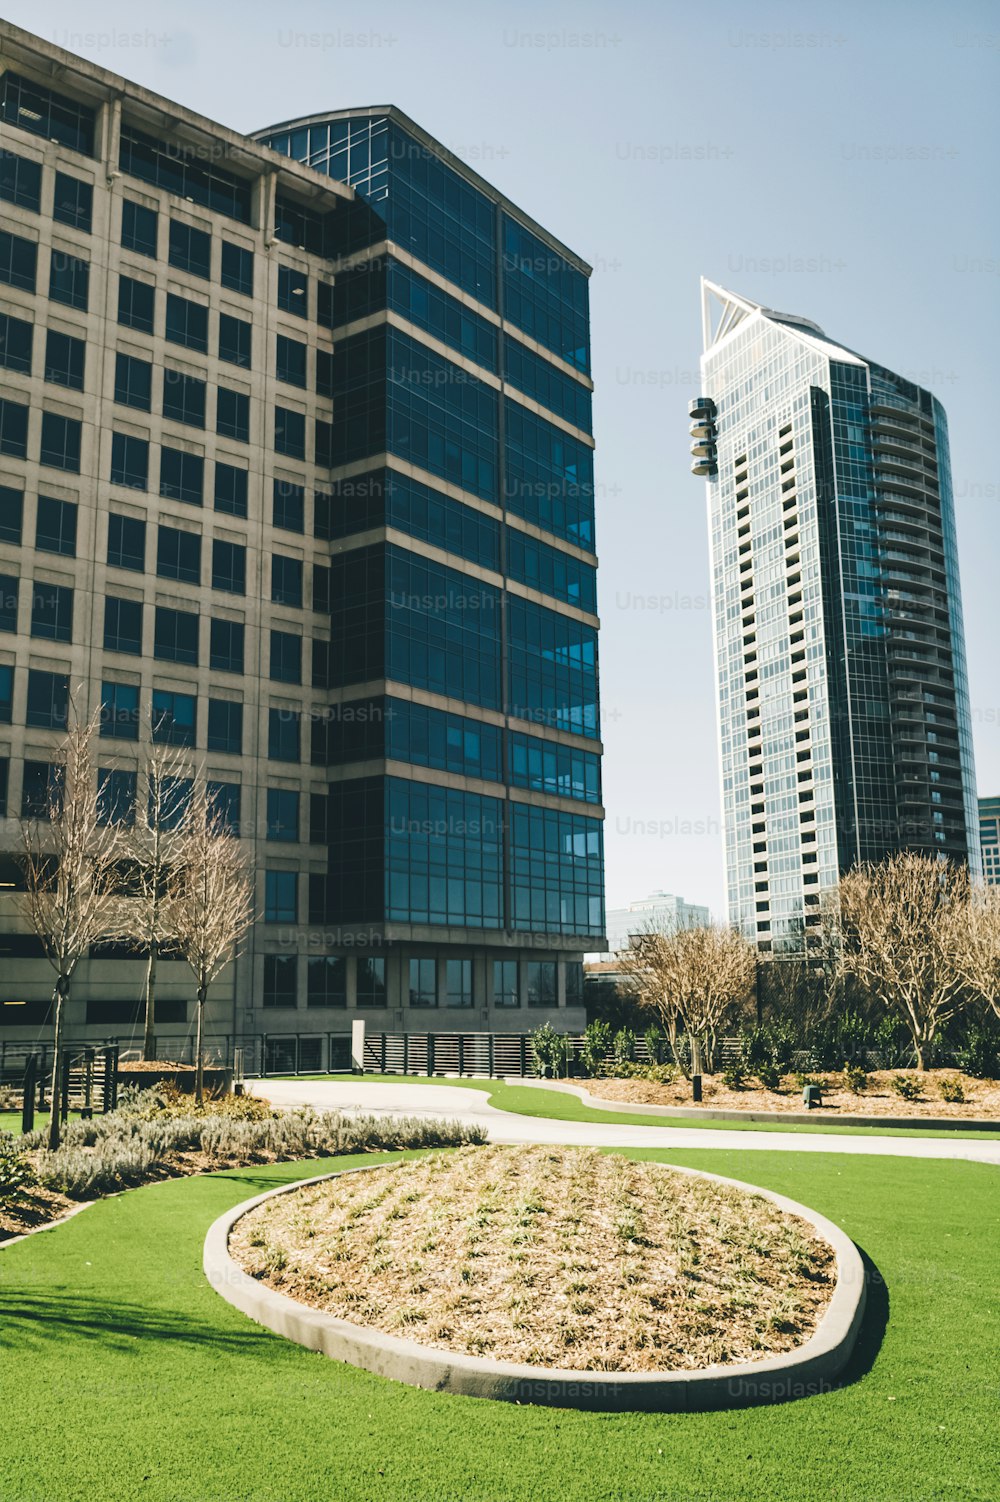 a grassy area in front of two tall buildings